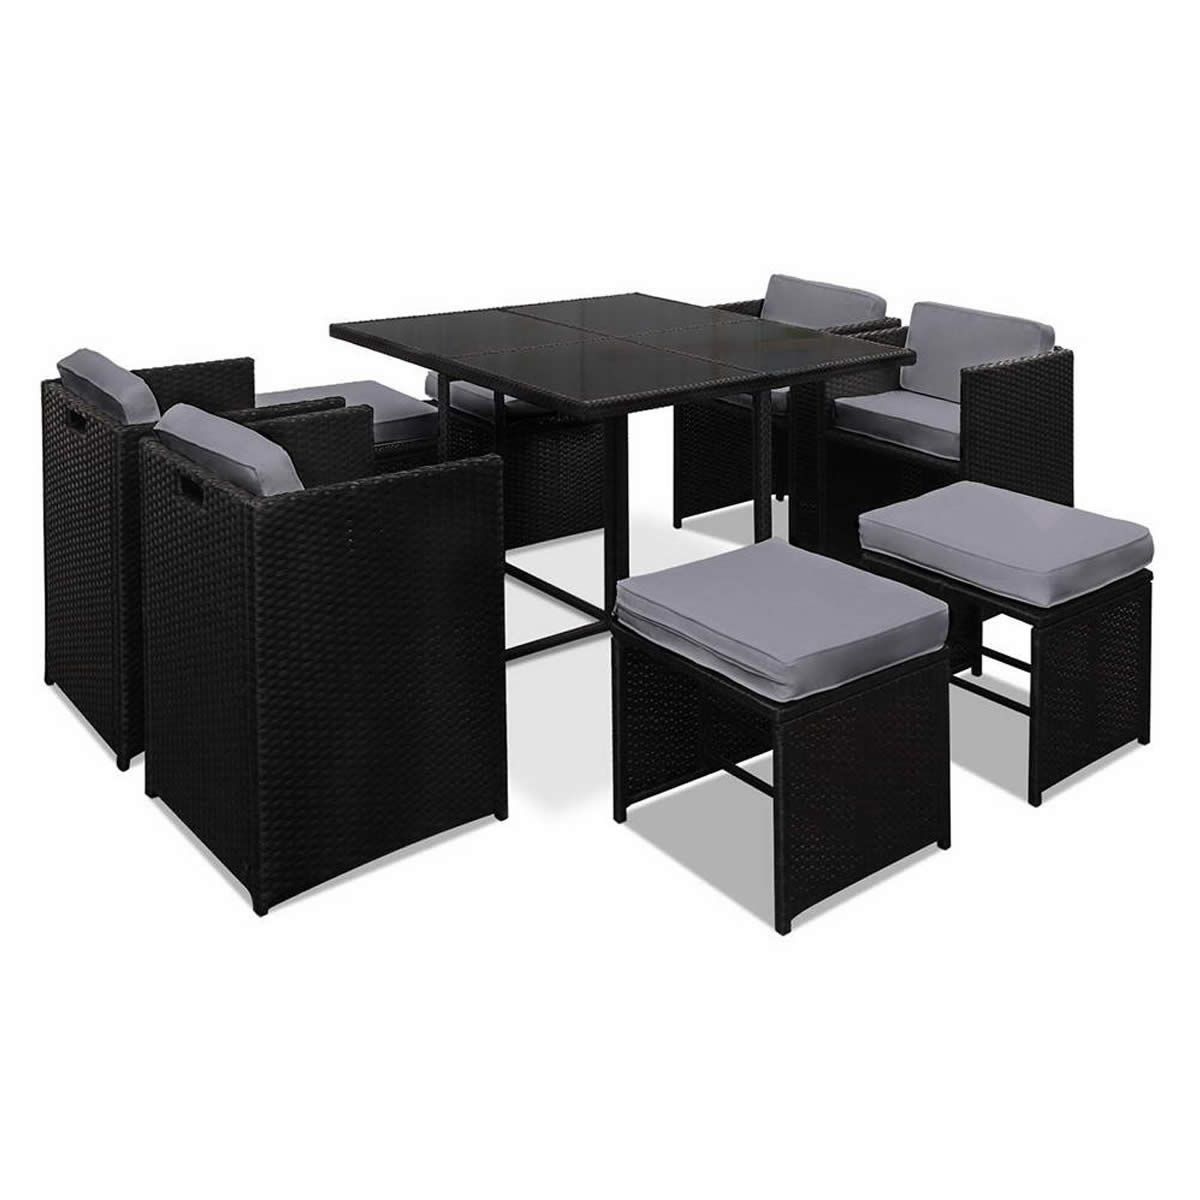 Hawaii Dining 9 Seater Set - Black and Grey